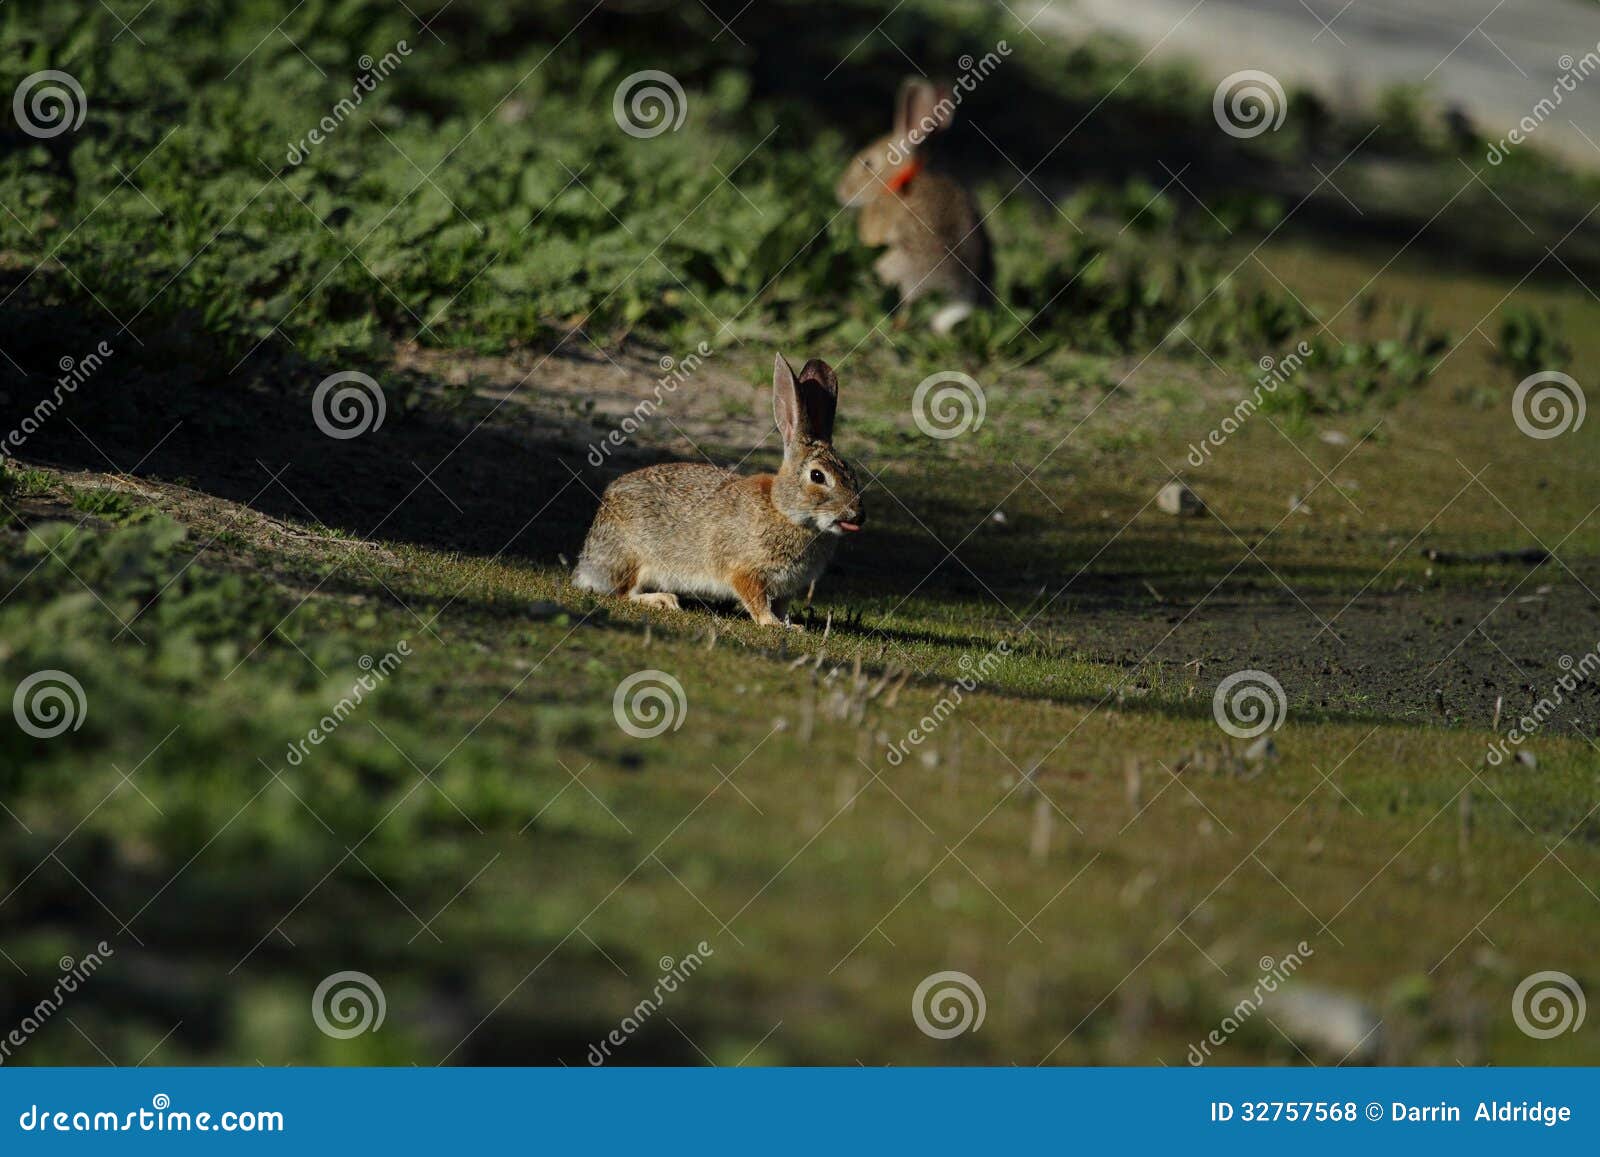 wild rabbits in countryside